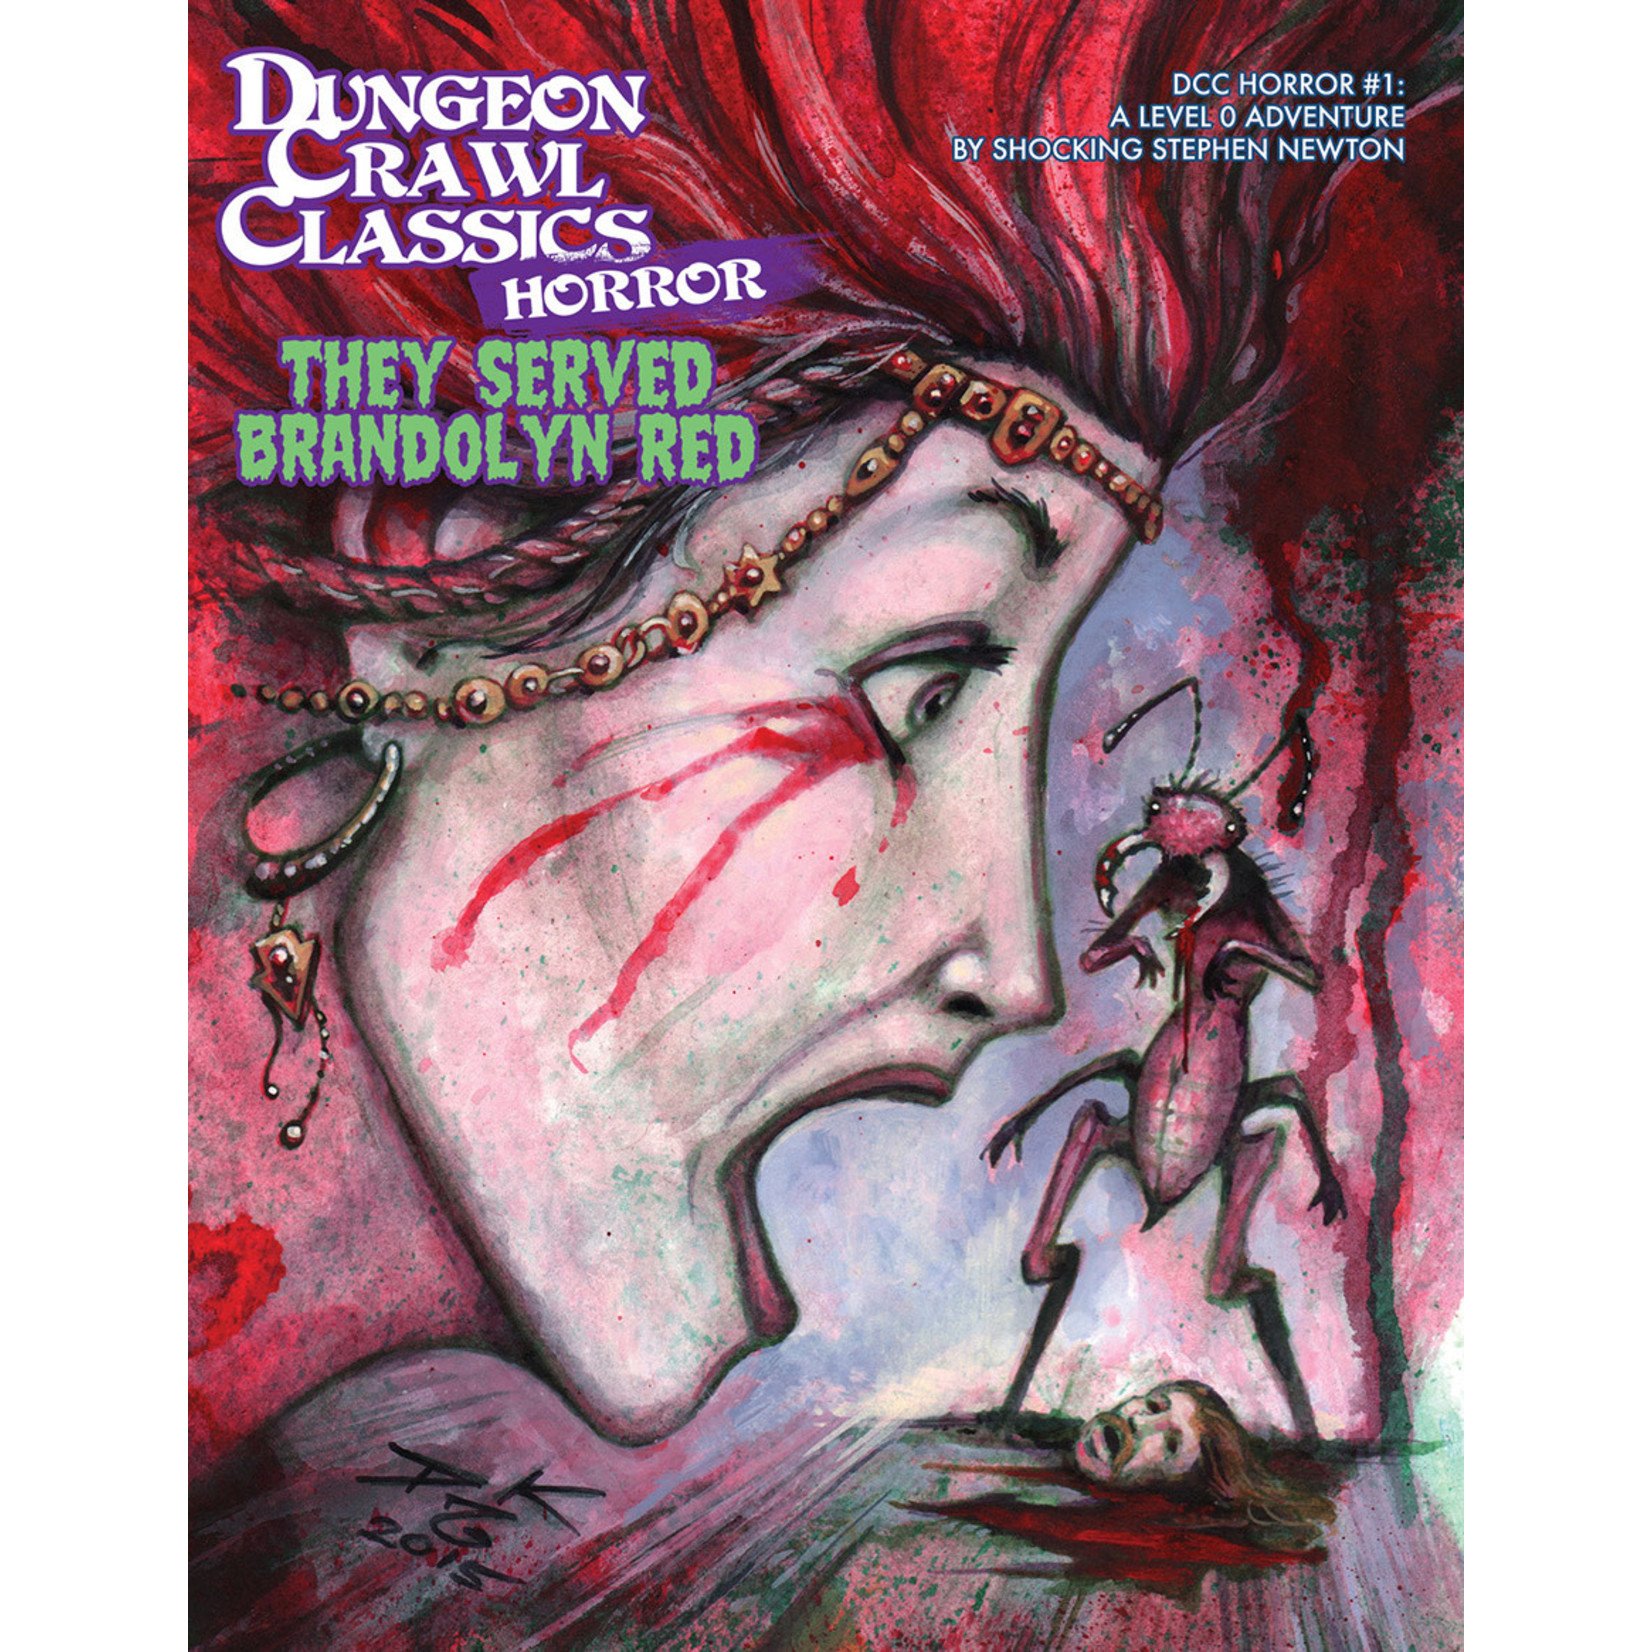 Goodman Games DCC Horror #1, Level 0 Adventure: They Served Brandolyn Red